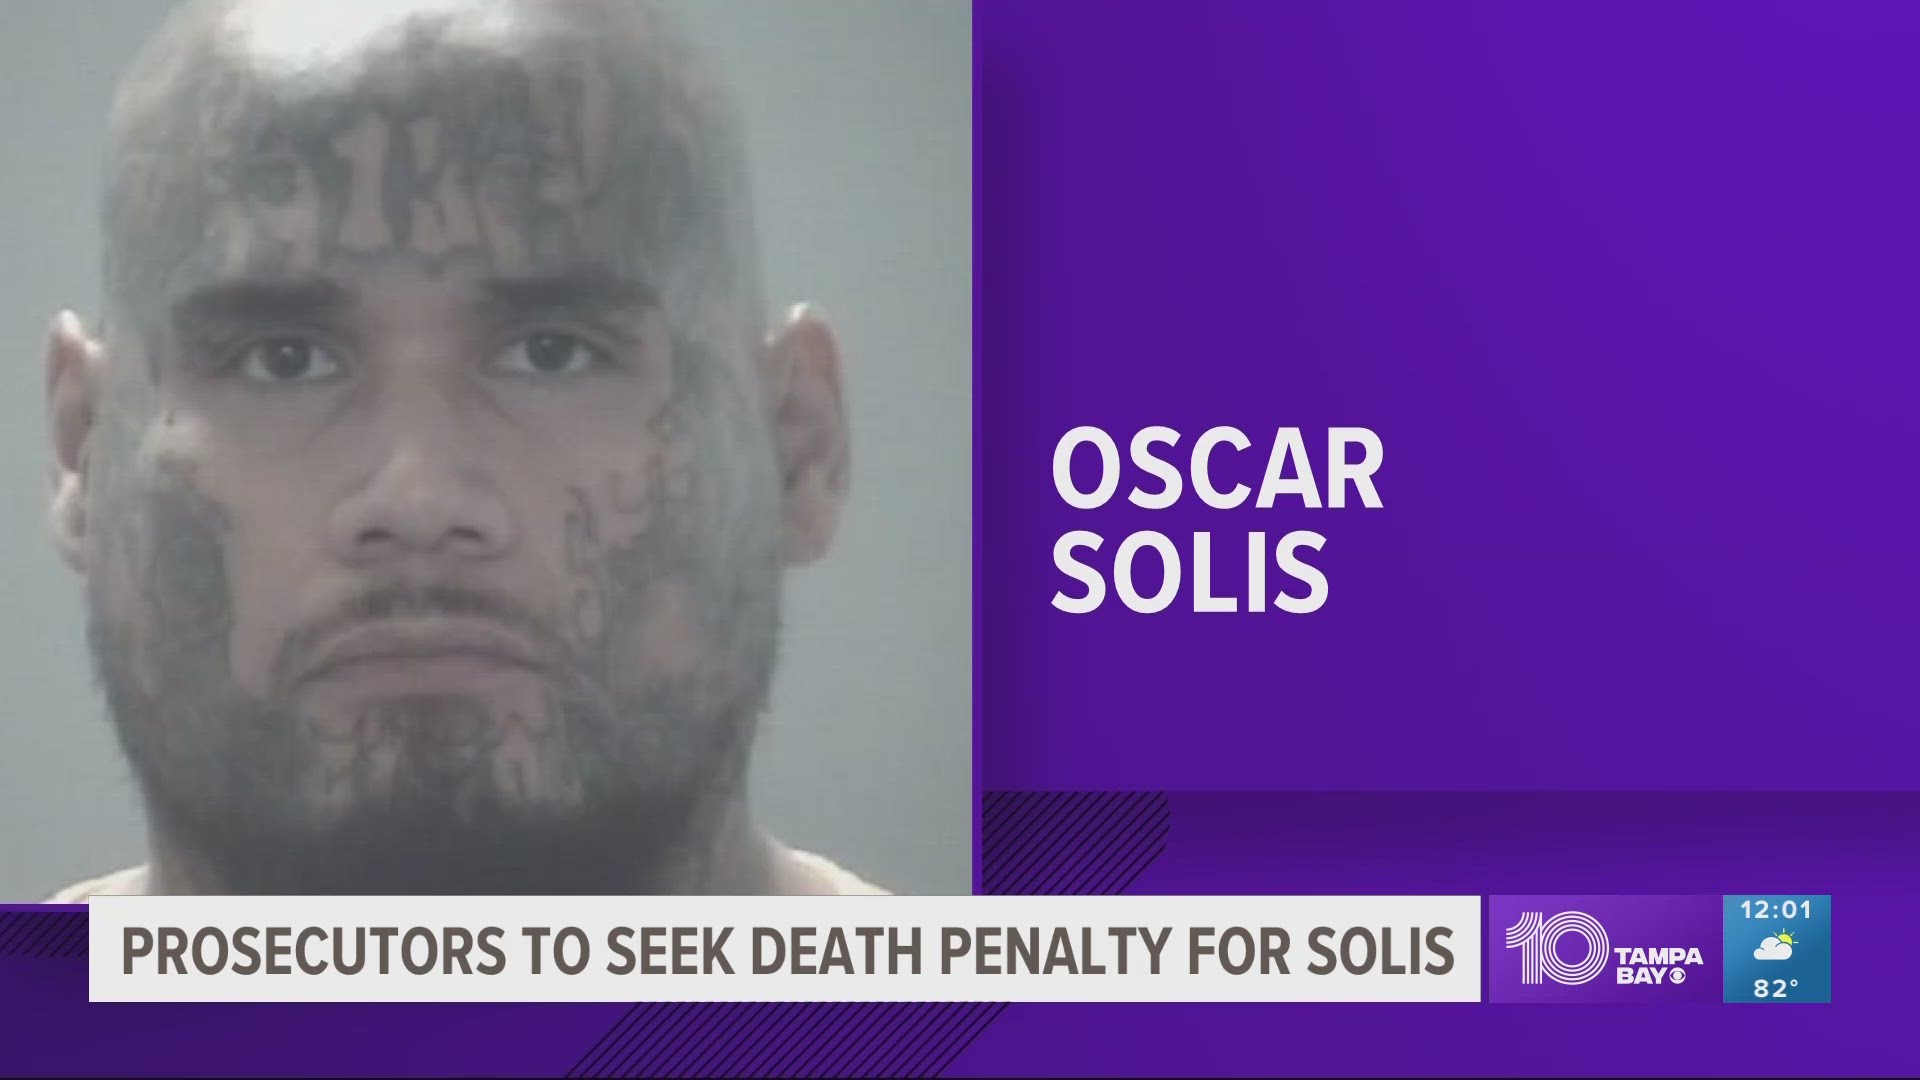 Oscar Solis was arrested for felony murder after the driver's wedding ring and car keys were found inside the house, the sheriff said.